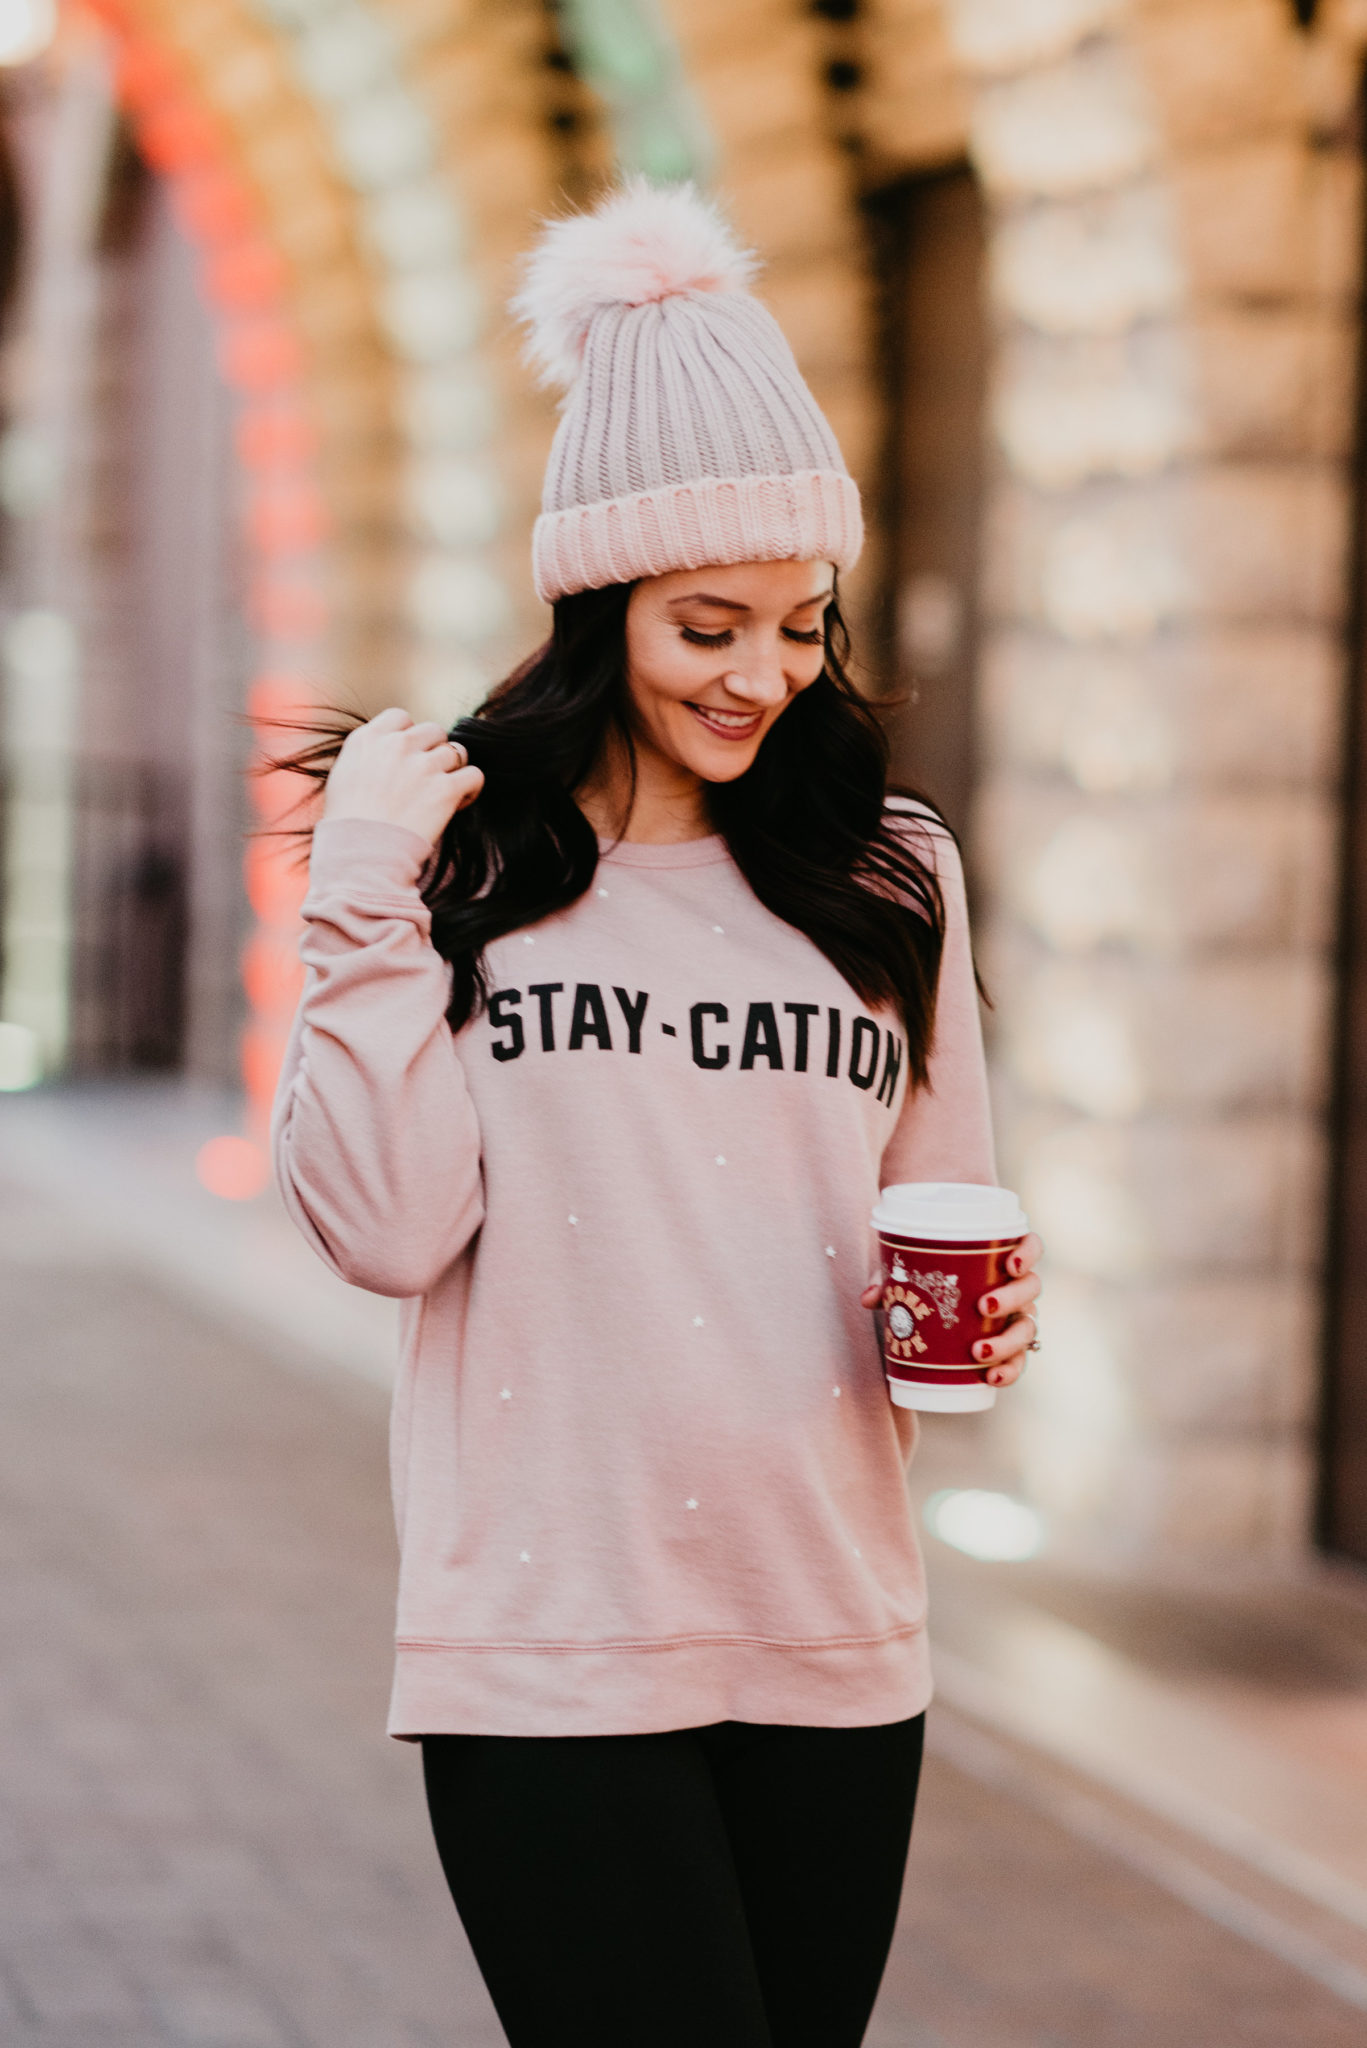 ways to treat yourself staycation sweatshirt and blush beanie - 15 Ways to Treat Yourself by popular Las Vegas style blogger Outfits & Outings